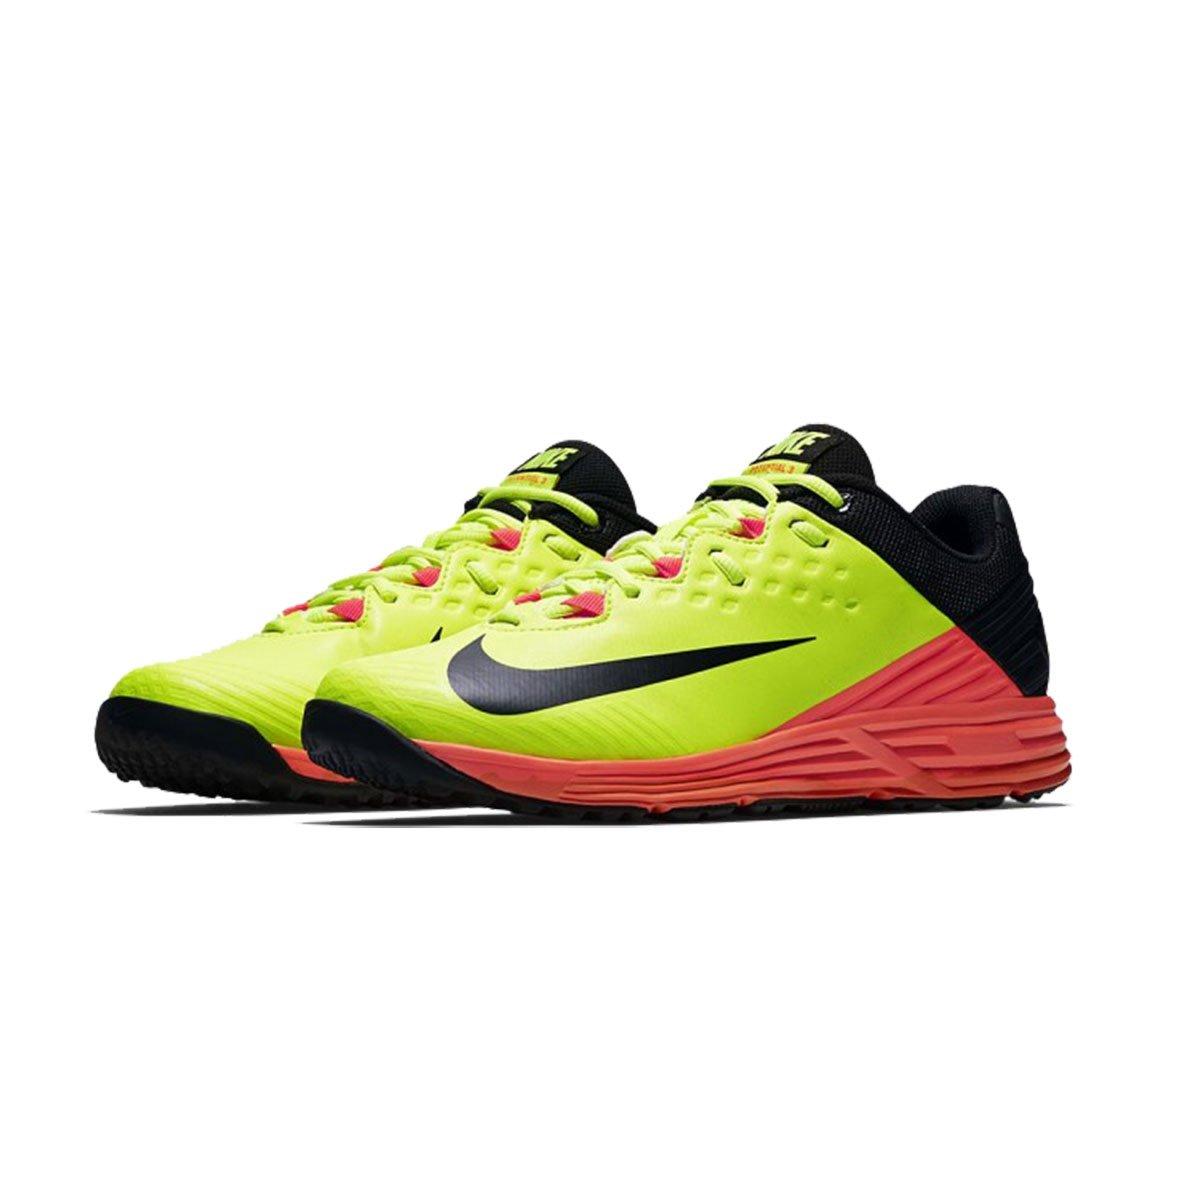 Buy Nike Potential 3 Cricket Shoes Online India